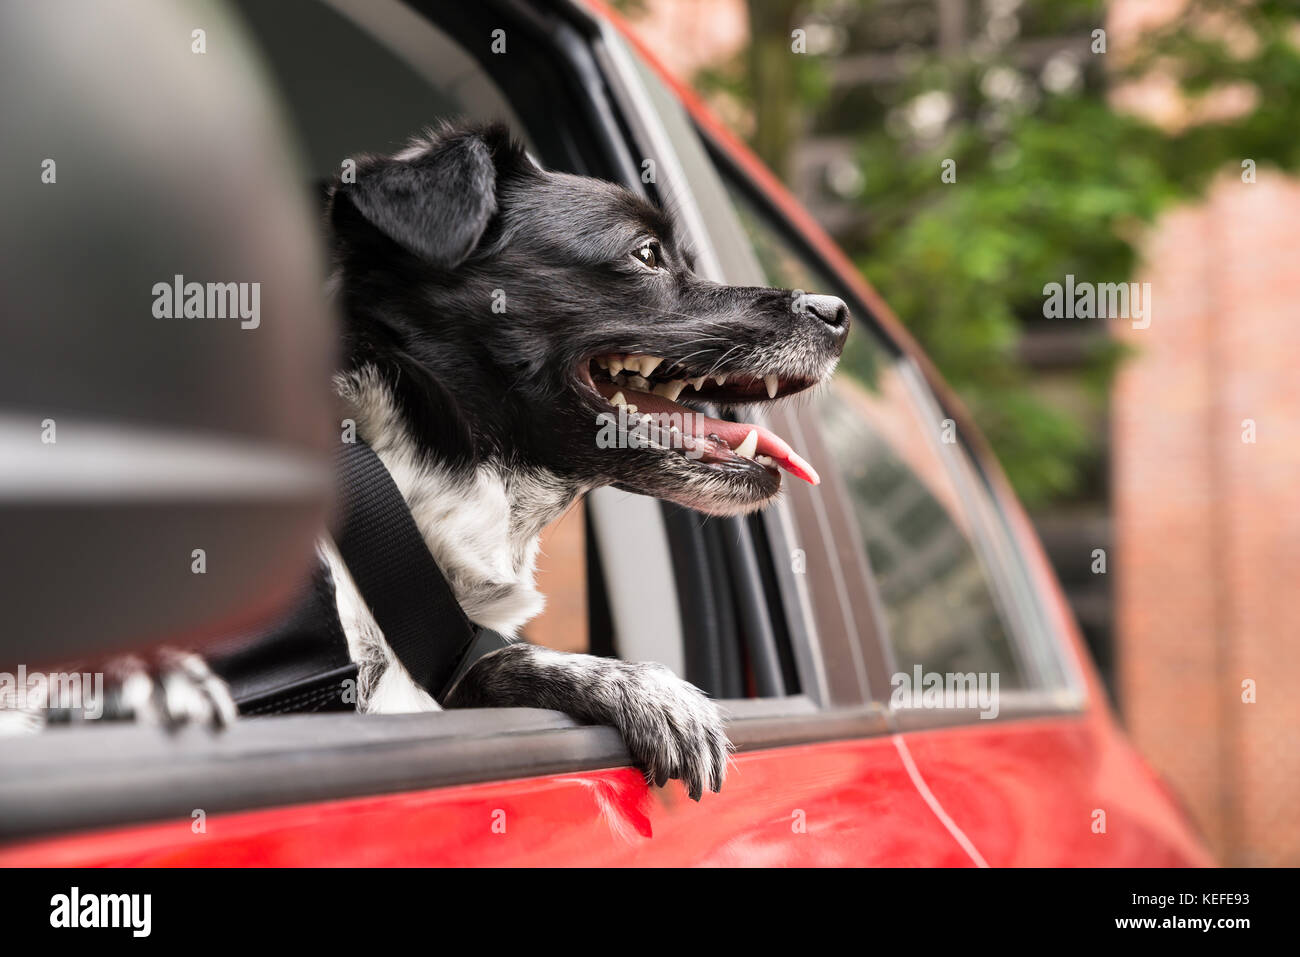 Dog Looking Out Of A Red Car Window And Sticking Tongue Out Stock Photo